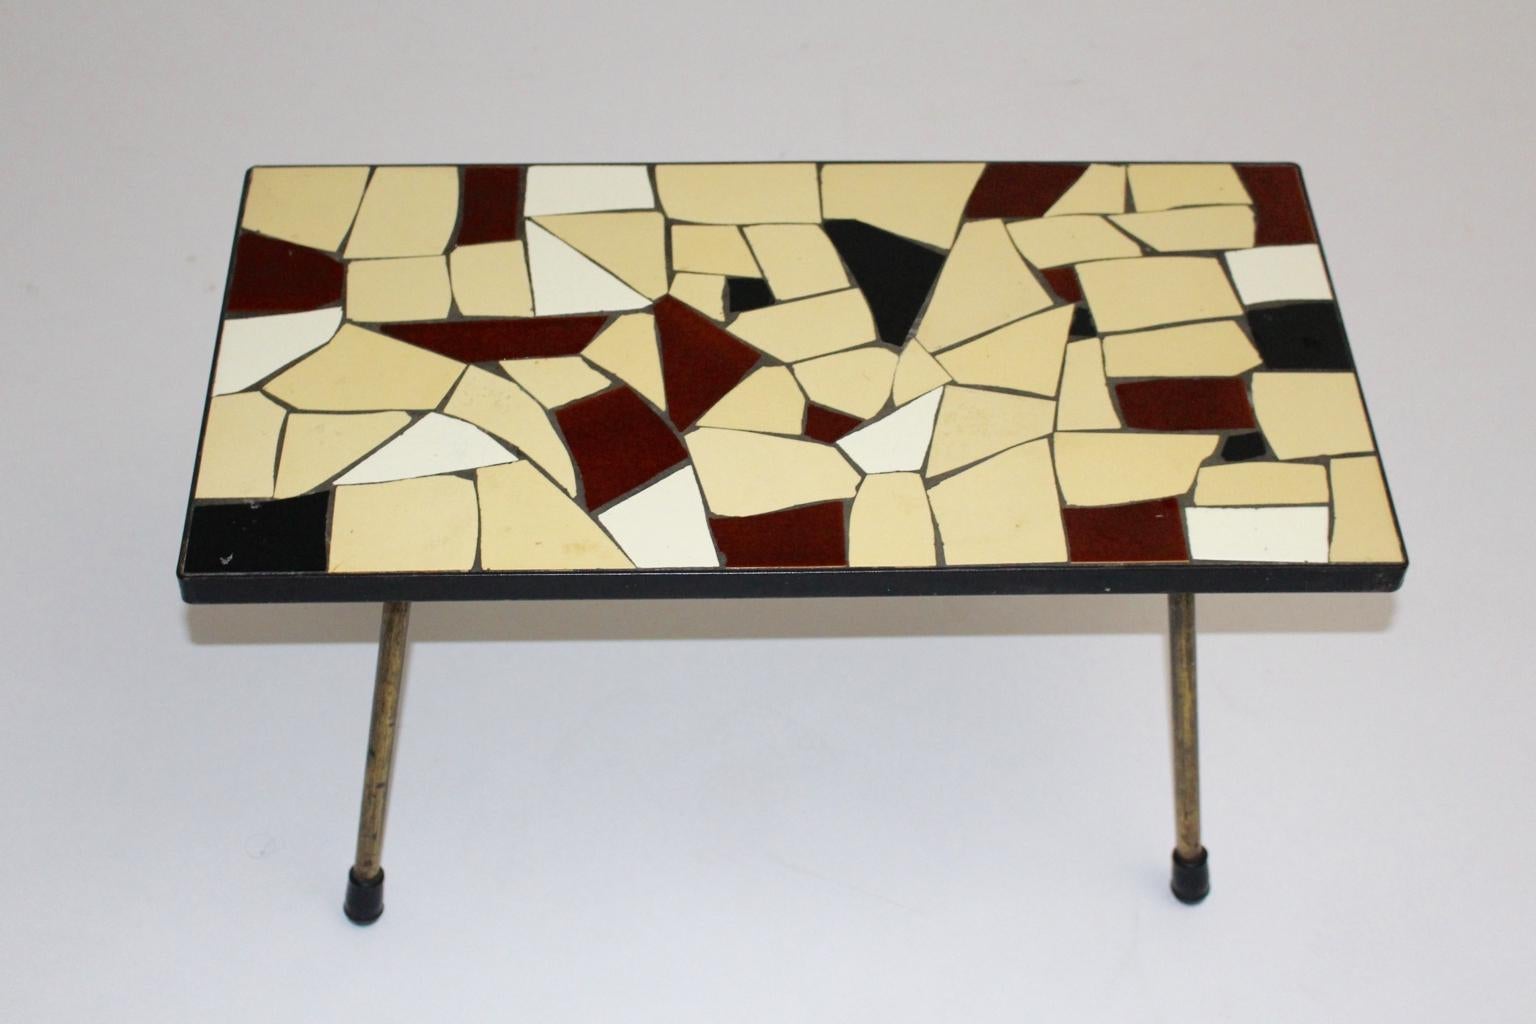 Mid Century Modern vintage sofa table or coffee table, which was designed and executed in Vienna circa 1950.
While the coffee table shows a beautiful plate with ceramic tiles in the colors brown, ivory and white, the brass feet has black rubber